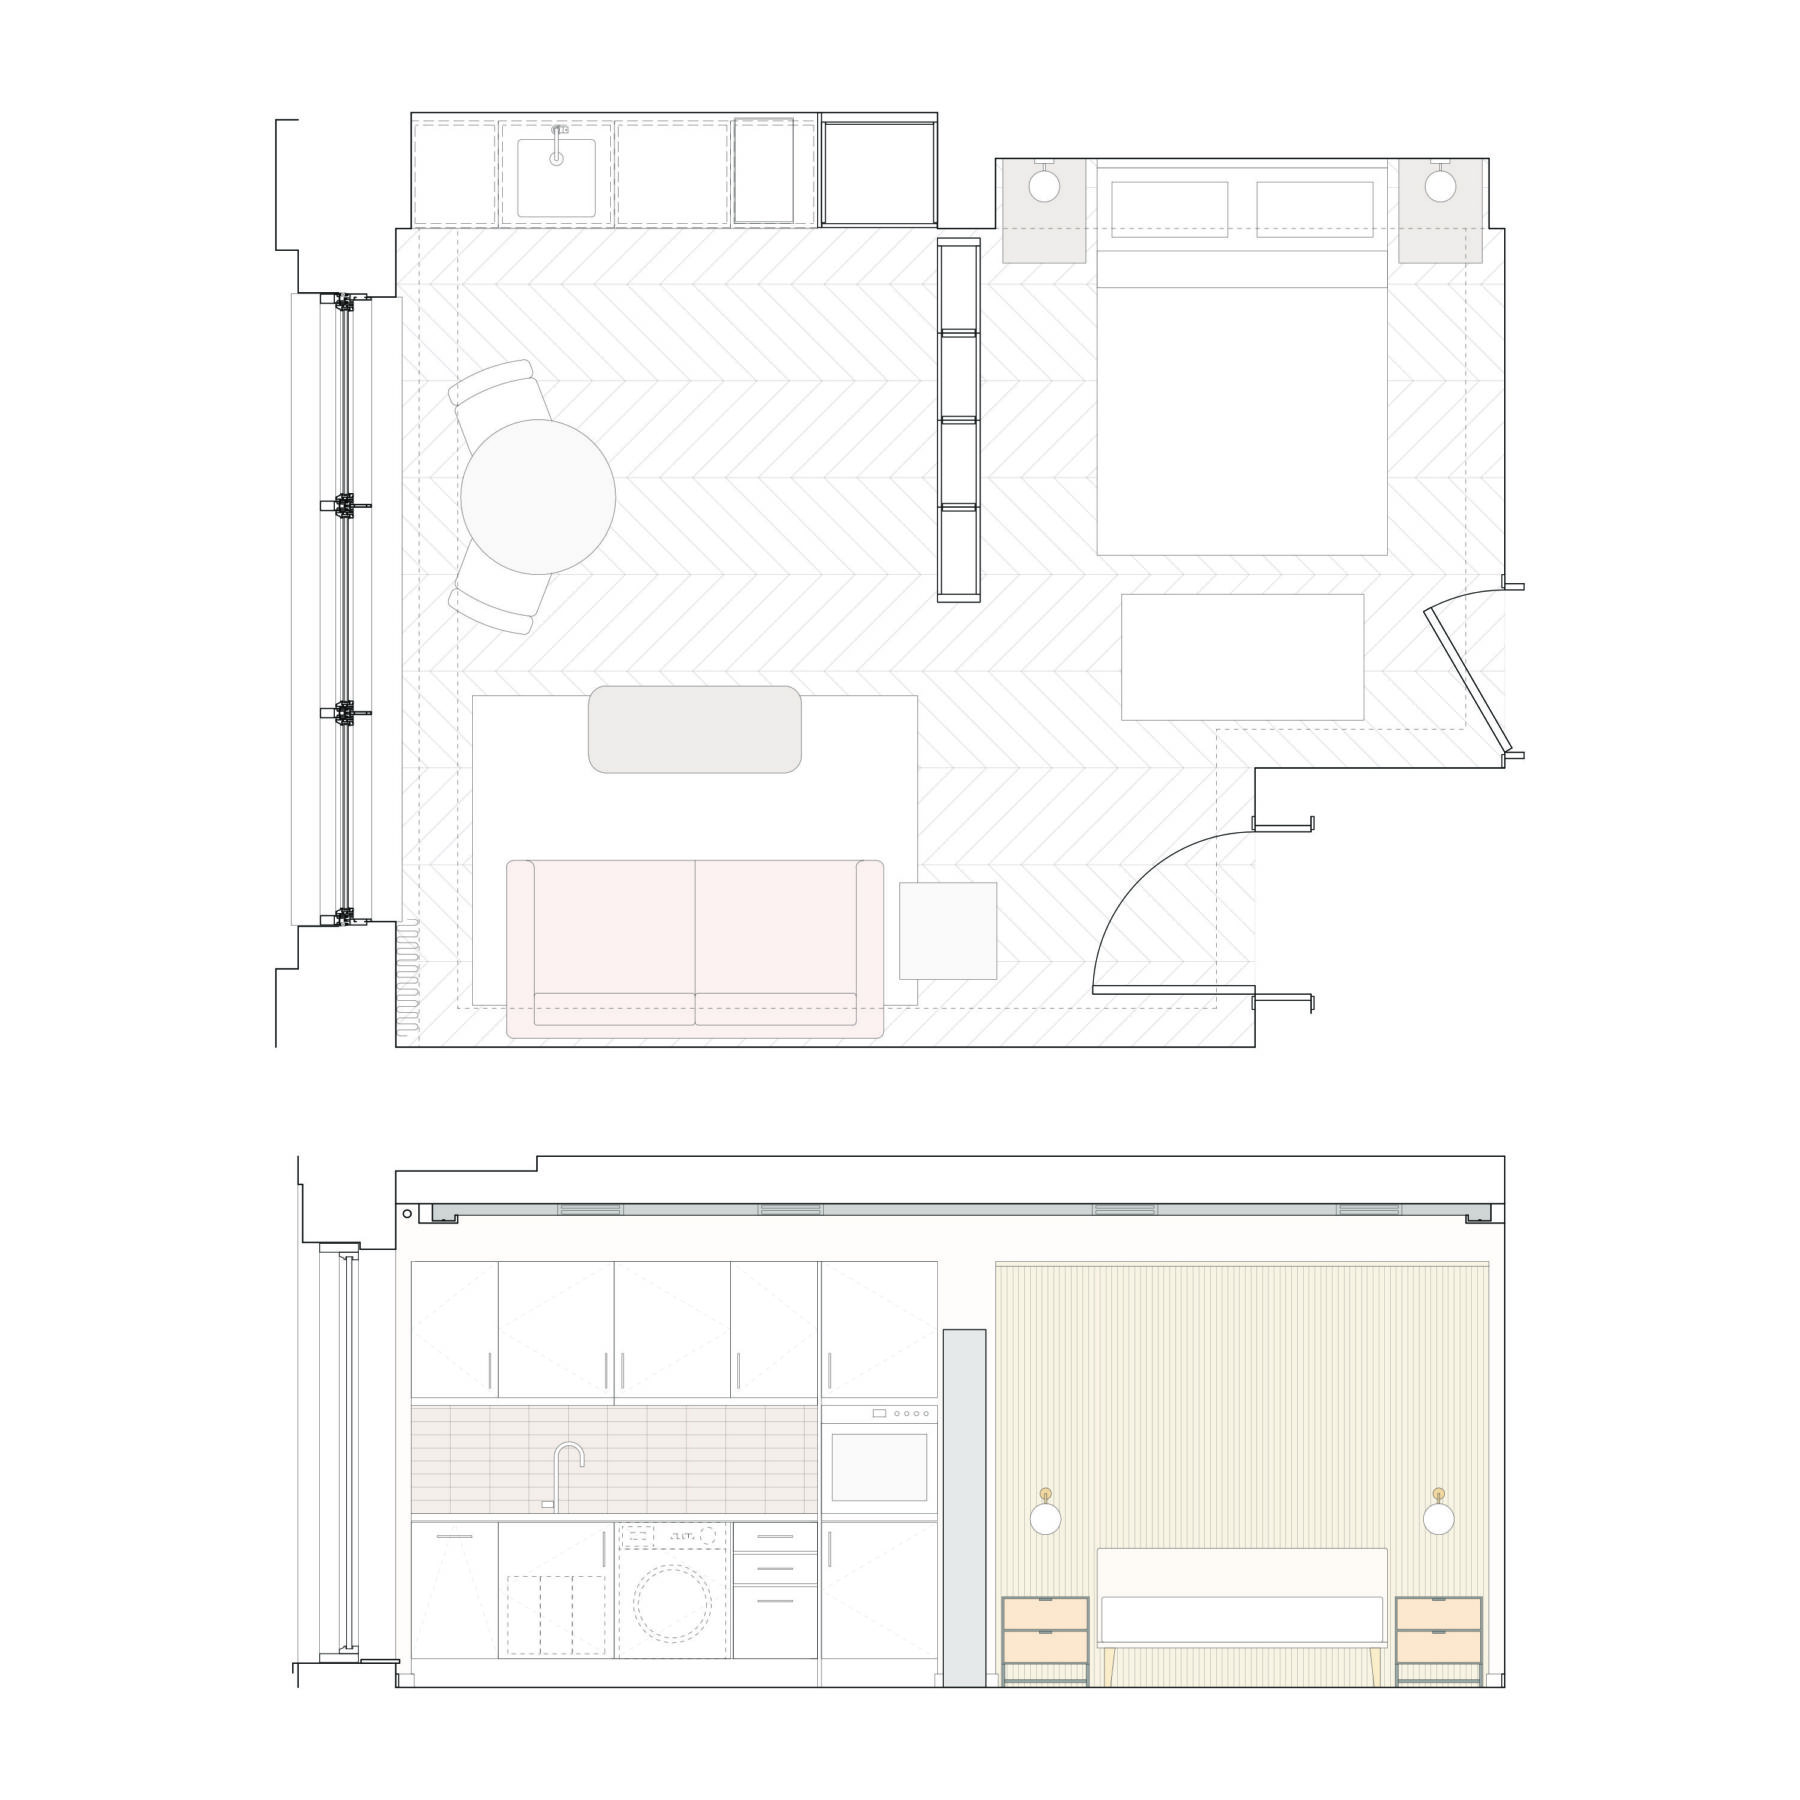 Serviced apartments layout study in plan and elevation